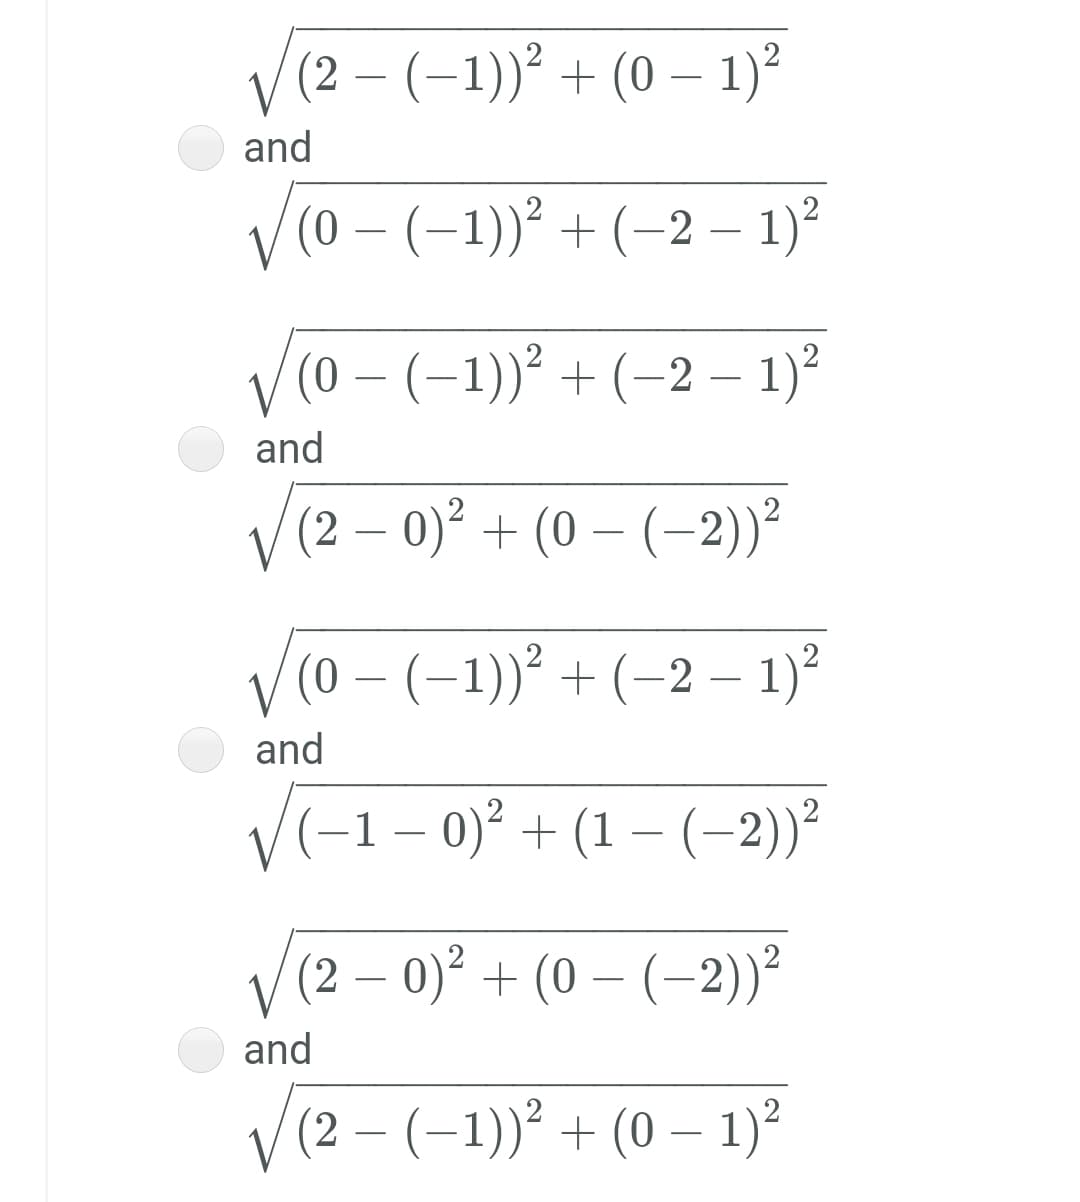 (2 – (-1))² + (0 – 1)?
and
V(0-(-1))² + (-2 – 1)²
(0 – (–1))² + (–2 – 1)?
and
(2 – 0)² + (0 – (–2))?
V(0 – (-1))² + (-2 – 1)²
and
V(-1– 0)² + (1 – (-2))²
V(2 – 0)² + (0 – (–2))²
and
(2 – (–1))² + (0 – 1)²
